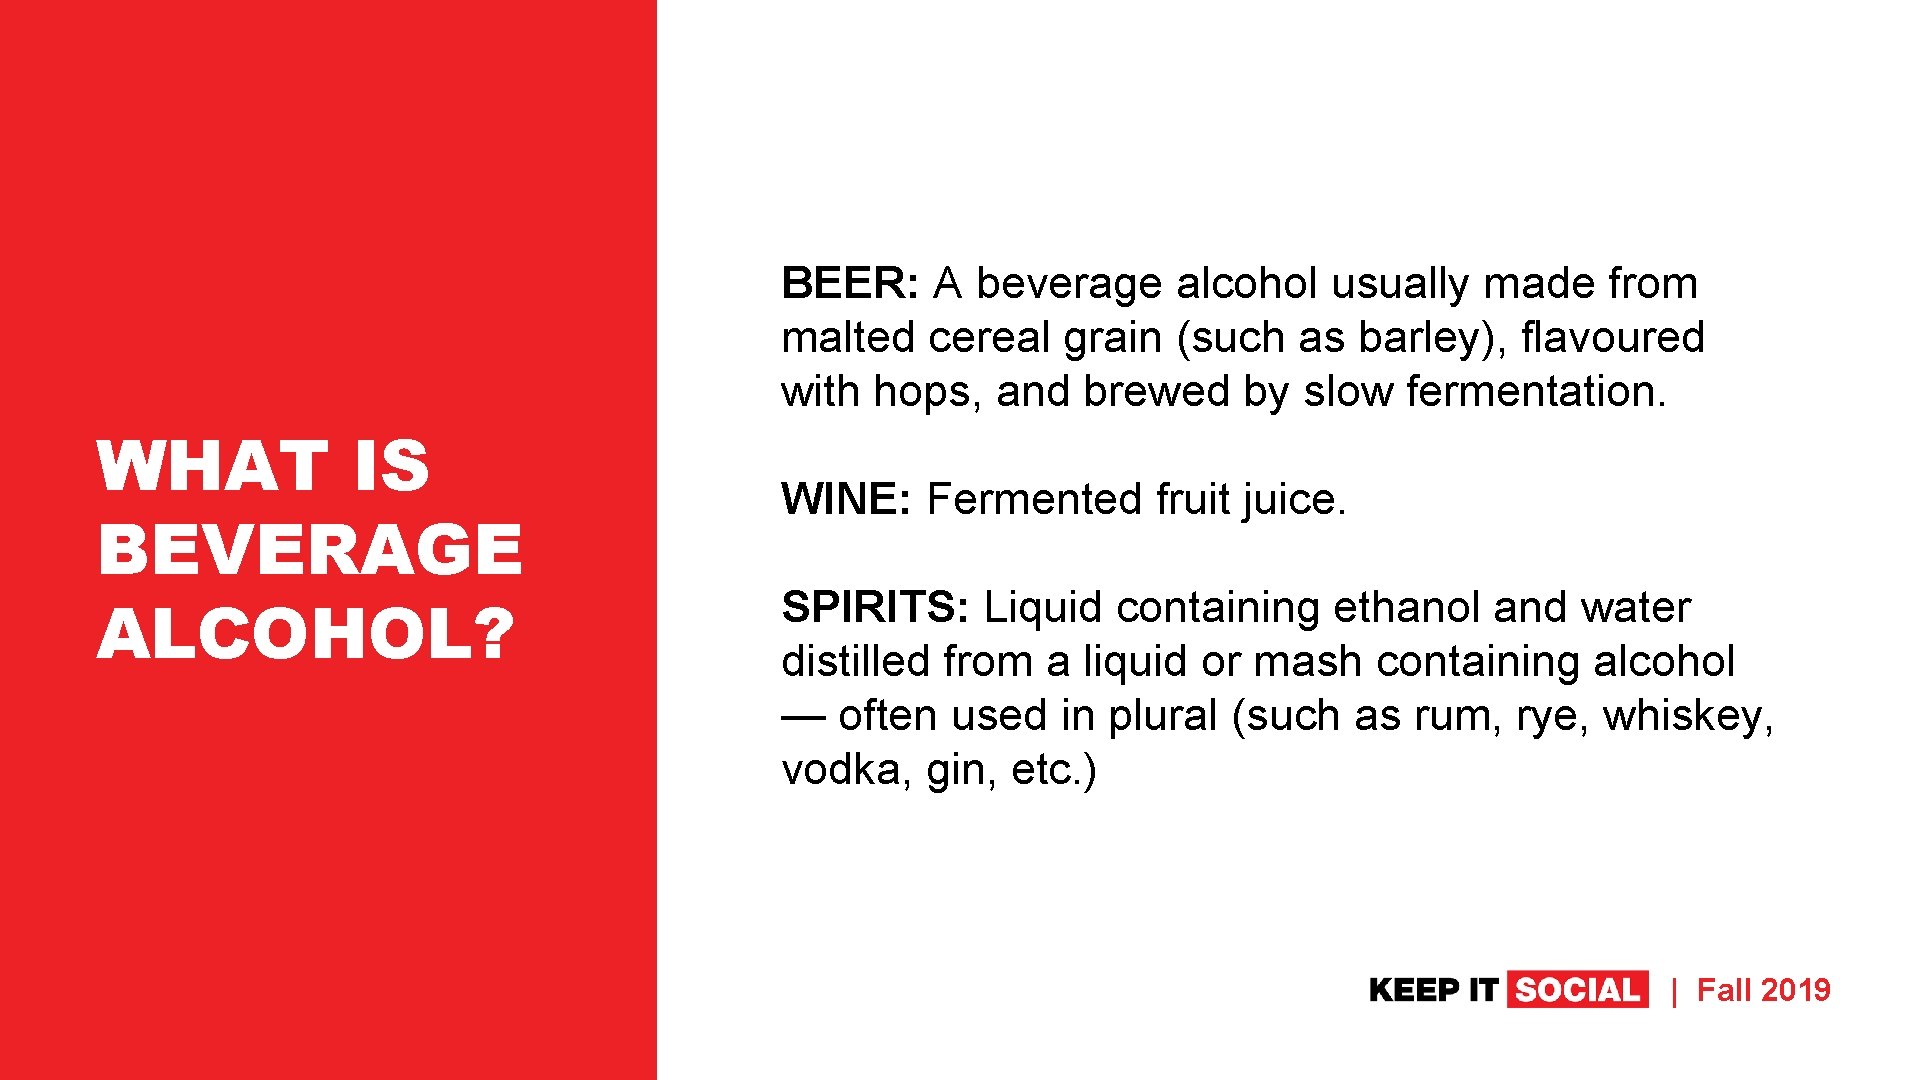 WHAT IS BEVERAGE ALCOHOL? BEER: A beverage alcohol usually made from malted cereal grain